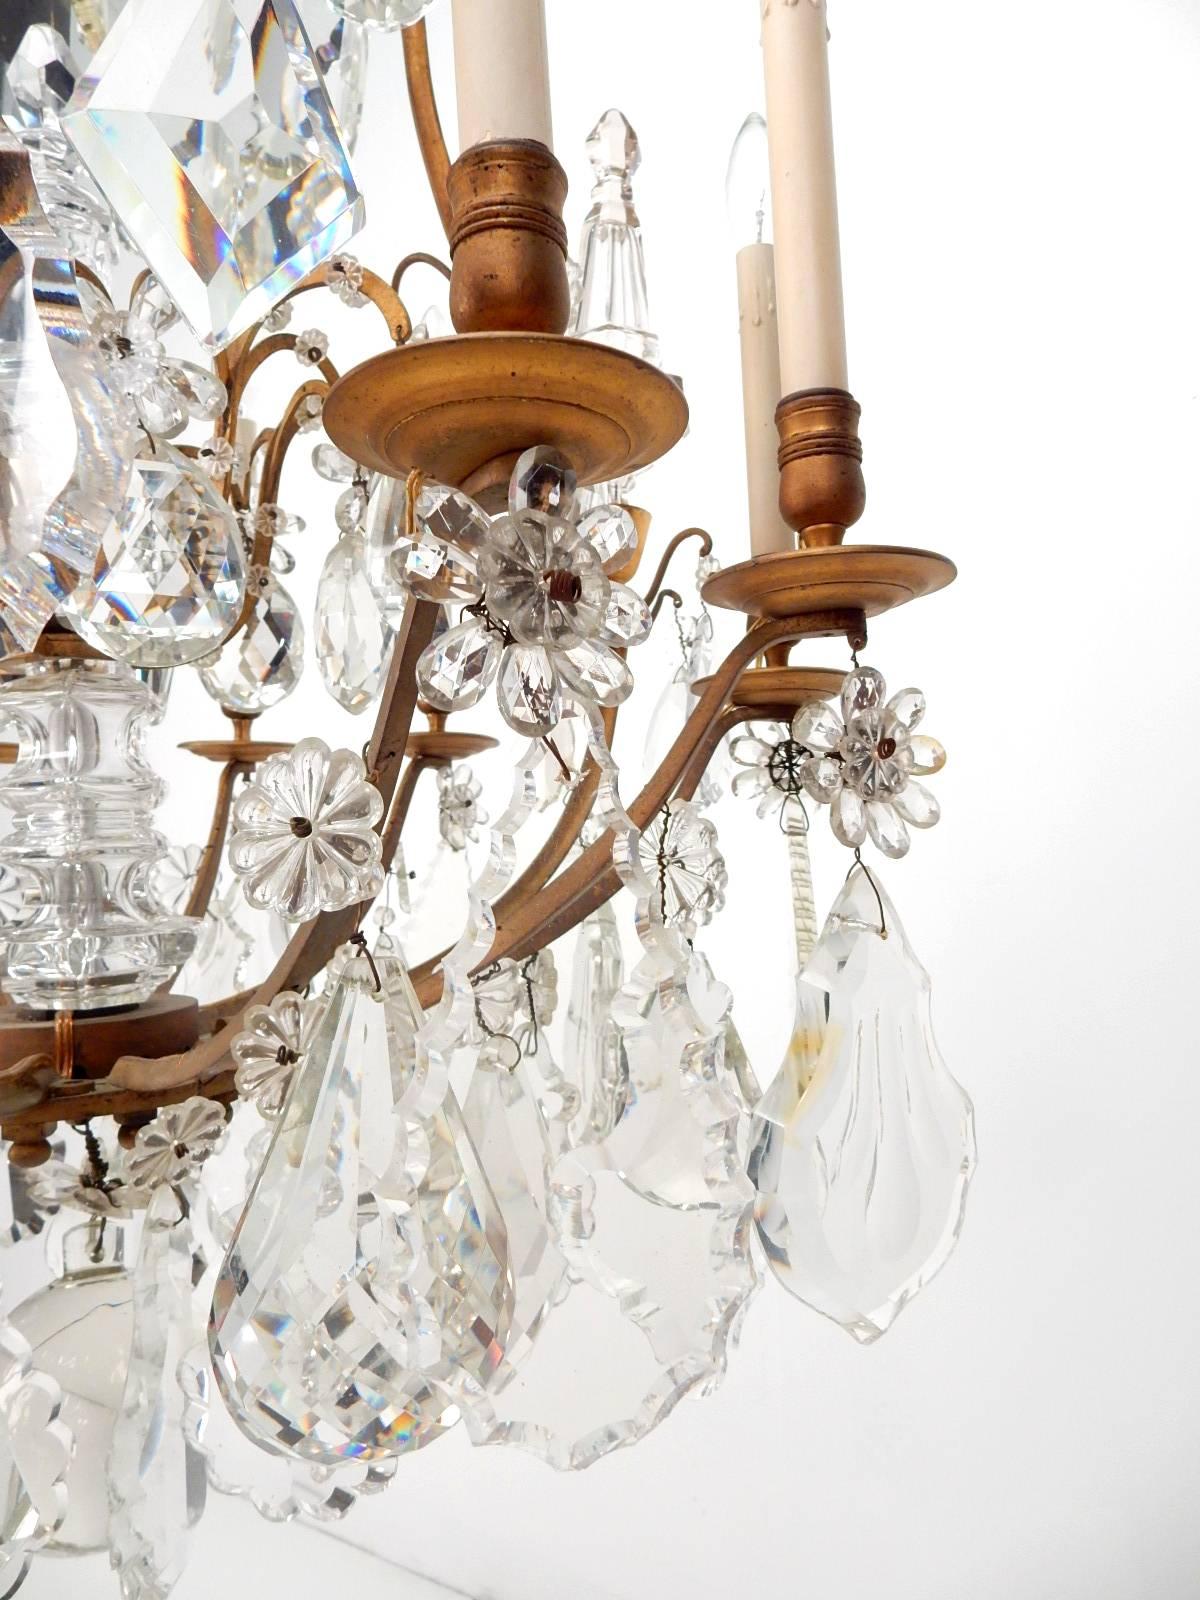 Spectacular French 19th century Napoleon era crystal chandelier. 
This is a very large and heavy gold gilded chandelier with massive clear stone crystals.
Nine candle bulbs.
From a vintage Beverly Hills estate.